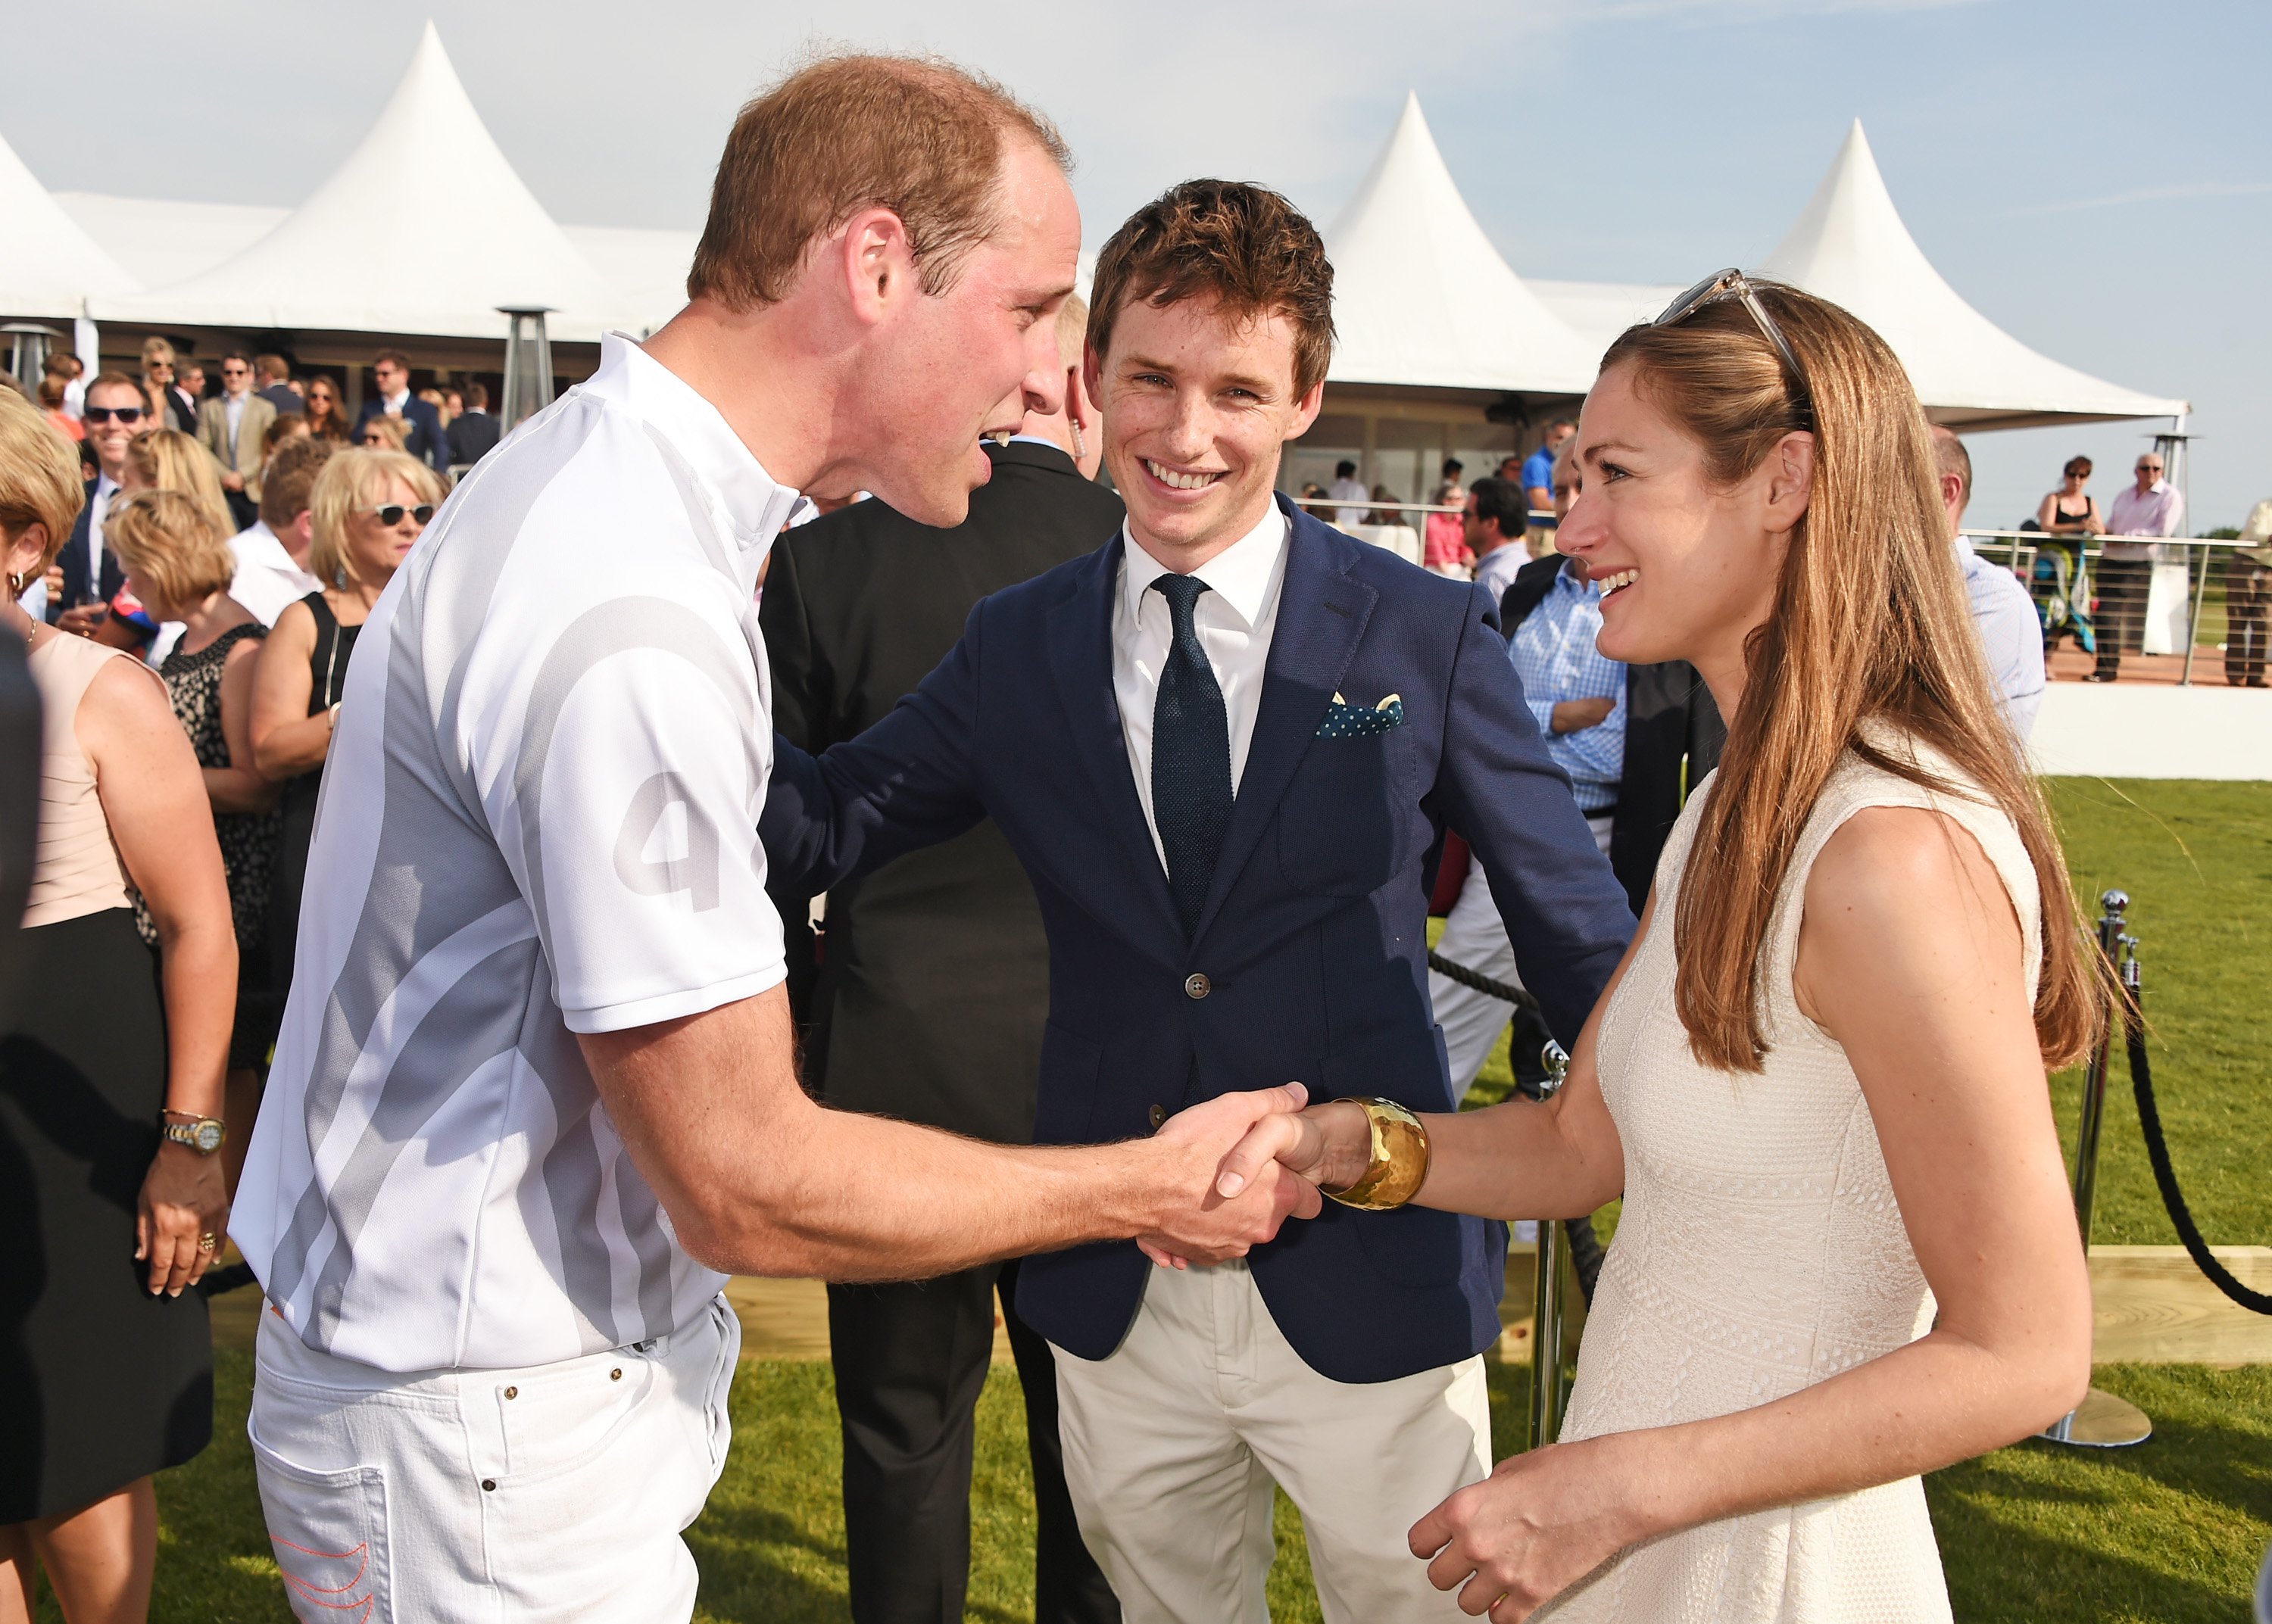 Prince William greeting Eddie Redmayne and his wife, Hannah Bagshawe, at the Audi Polo Challenge in 2015